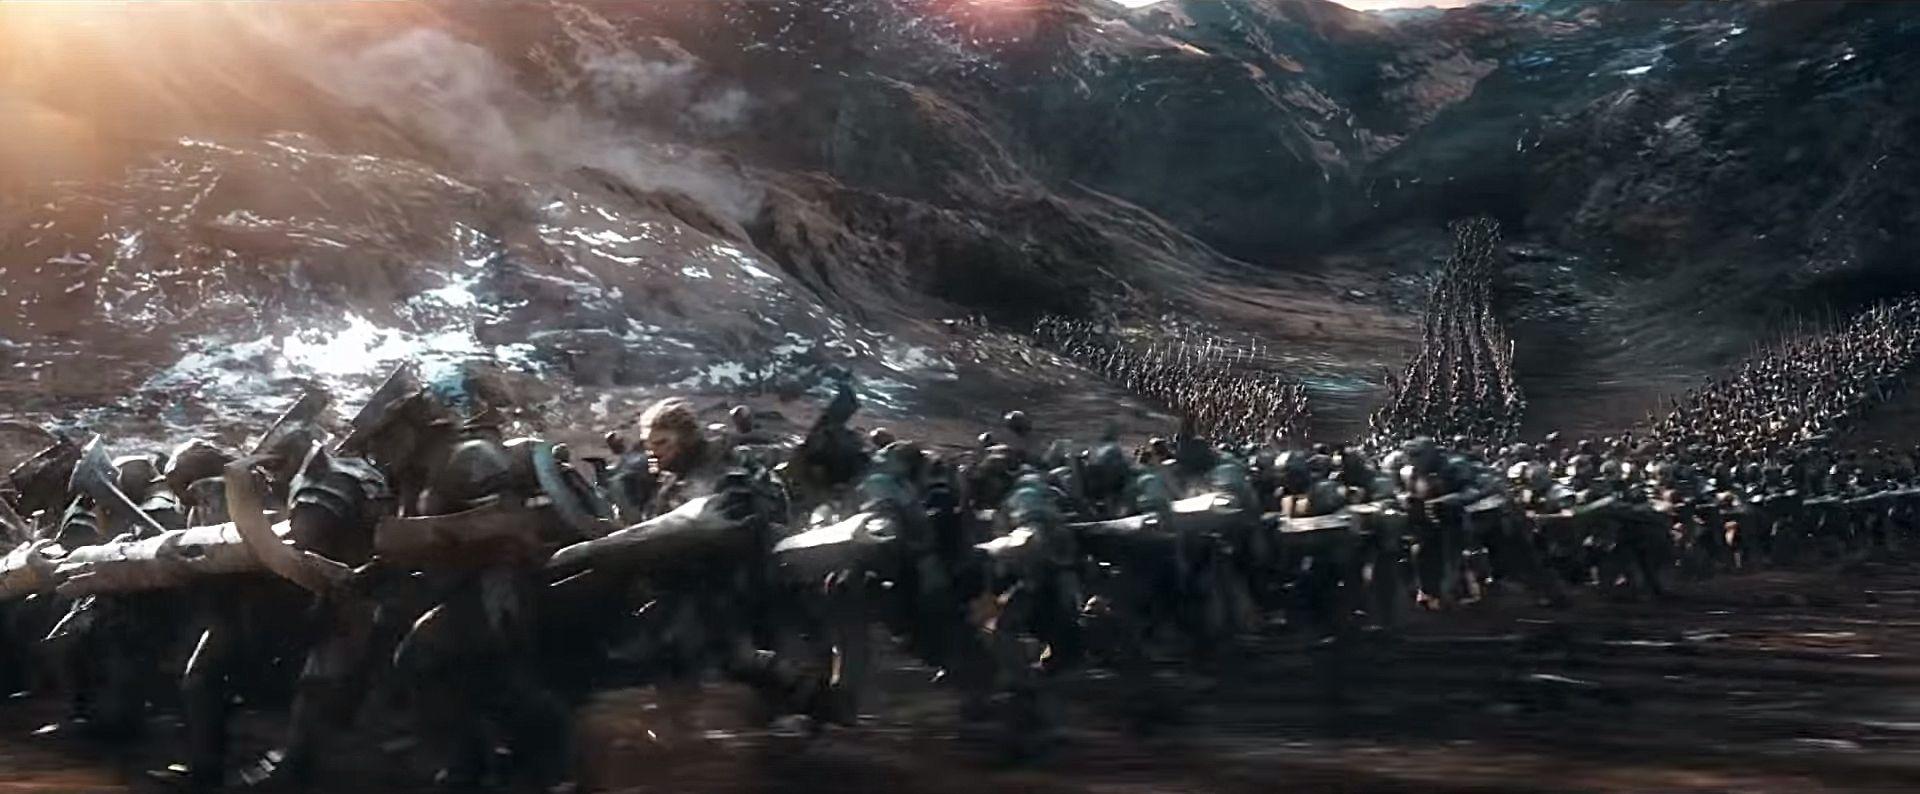 Three Screen Captures from The Hobbit Legacy Trailer!